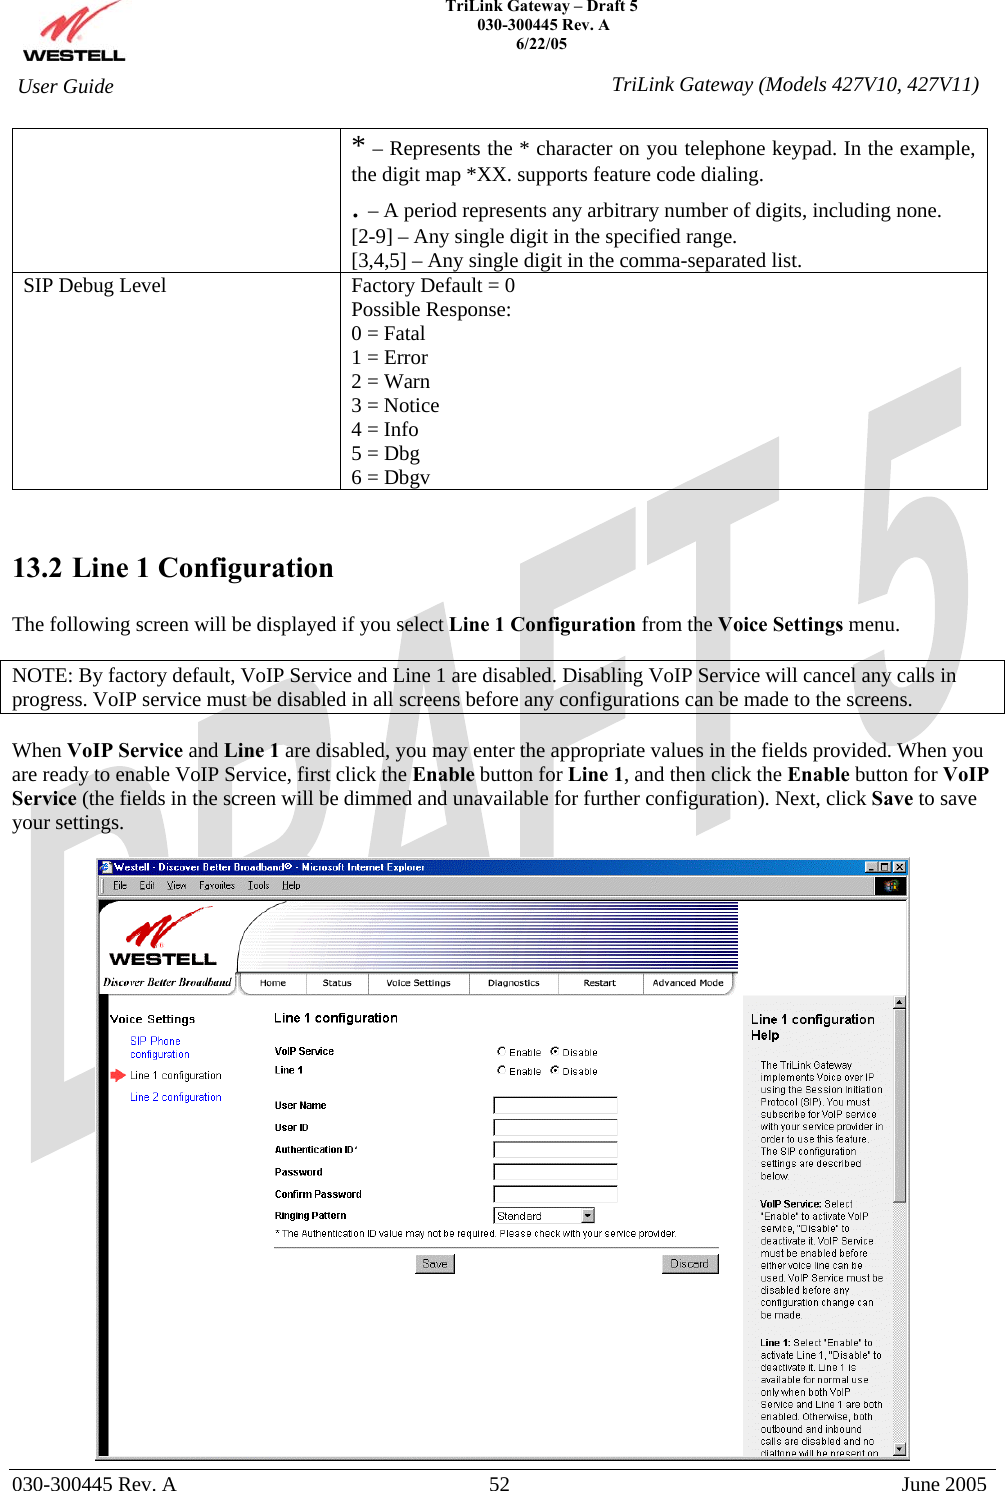    TriLink Gateway – Draft 5   030-300445 Rev. A 6/22/05   030-300445 Rev. A  52  June 2005  User Guide  TriLink Gateway (Models 427V10, 427V11)* – Represents the * character on you telephone keypad. In the example, the digit map *XX. supports feature code dialing. . – A period represents any arbitrary number of digits, including none. [2-9] – Any single digit in the specified range. [3,4,5] – Any single digit in the comma-separated list. SIP Debug Level  Factory Default = 0 Possible Response: 0 = Fatal 1 = Error 2 = Warn 3 = Notice 4 = Info 5 = Dbg 6 = Dbgv   13.2 Line 1 Configuration  The following screen will be displayed if you select Line 1 Configuration from the Voice Settings menu.   NOTE: By factory default, VoIP Service and Line 1 are disabled. Disabling VoIP Service will cancel any calls in progress. VoIP service must be disabled in all screens before any configurations can be made to the screens.  When VoIP Service and Line 1 are disabled, you may enter the appropriate values in the fields provided. When you are ready to enable VoIP Service, first click the Enable button for Line 1, and then click the Enable button for VoIP Service (the fields in the screen will be dimmed and unavailable for further configuration). Next, click Save to save your settings.   